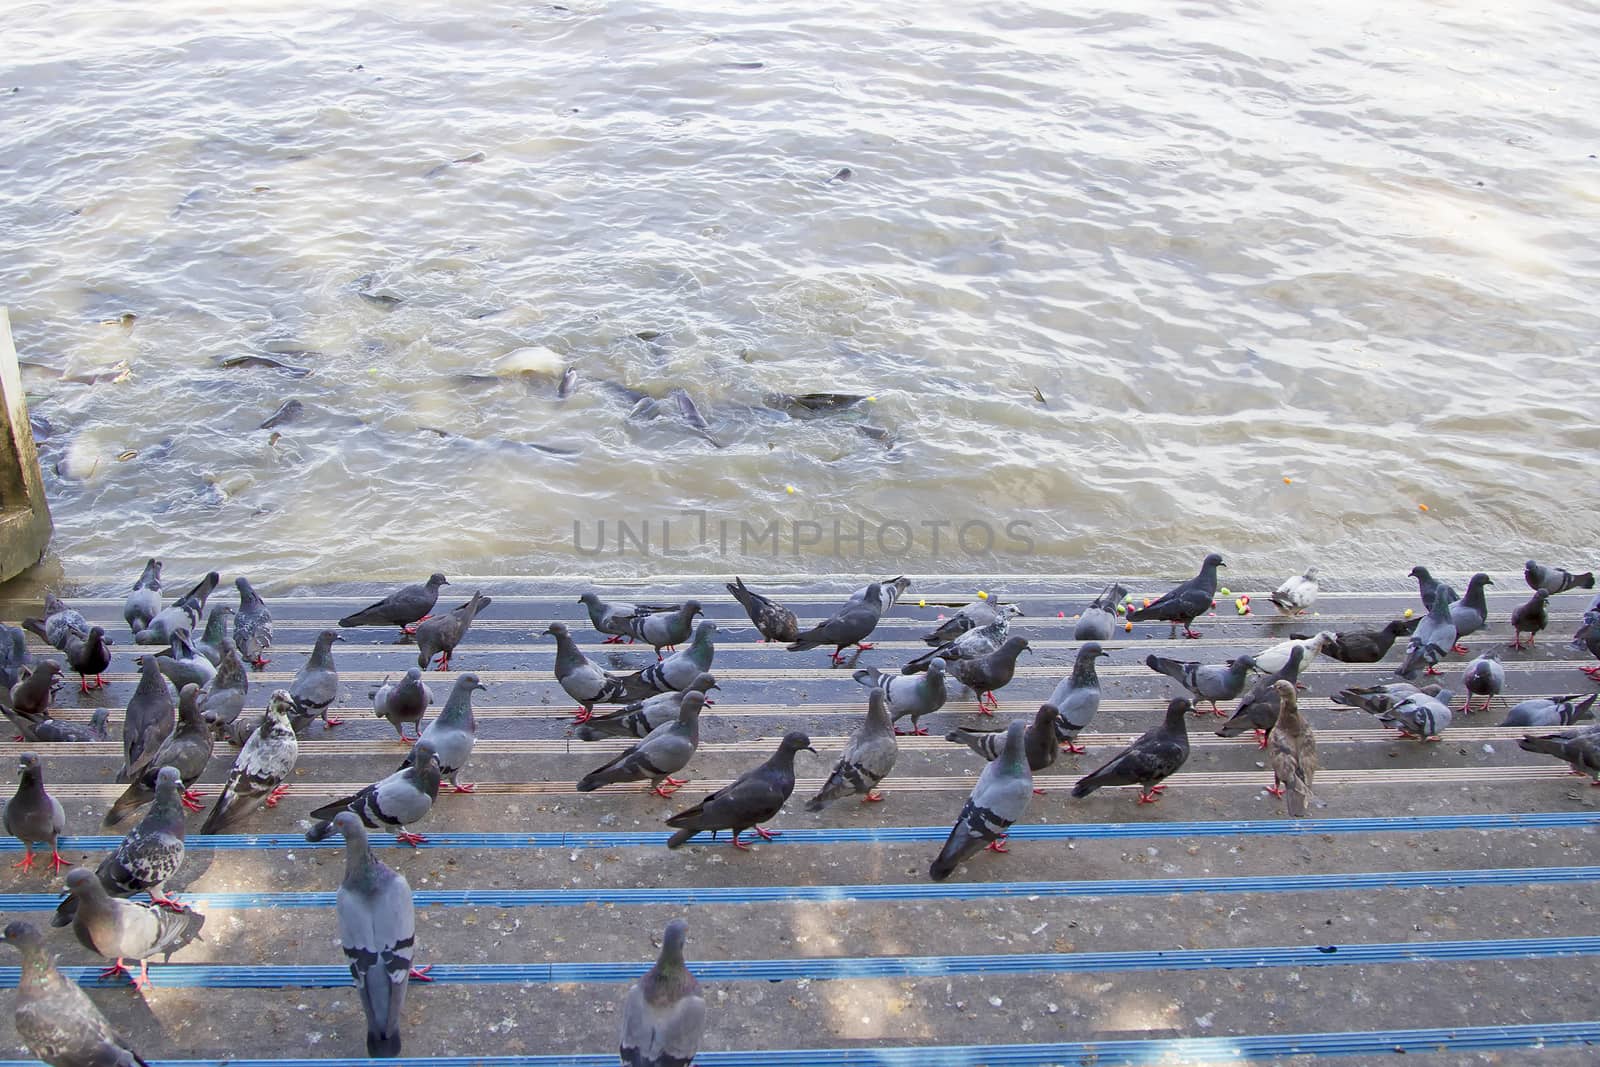 Many pigeons On the river floor